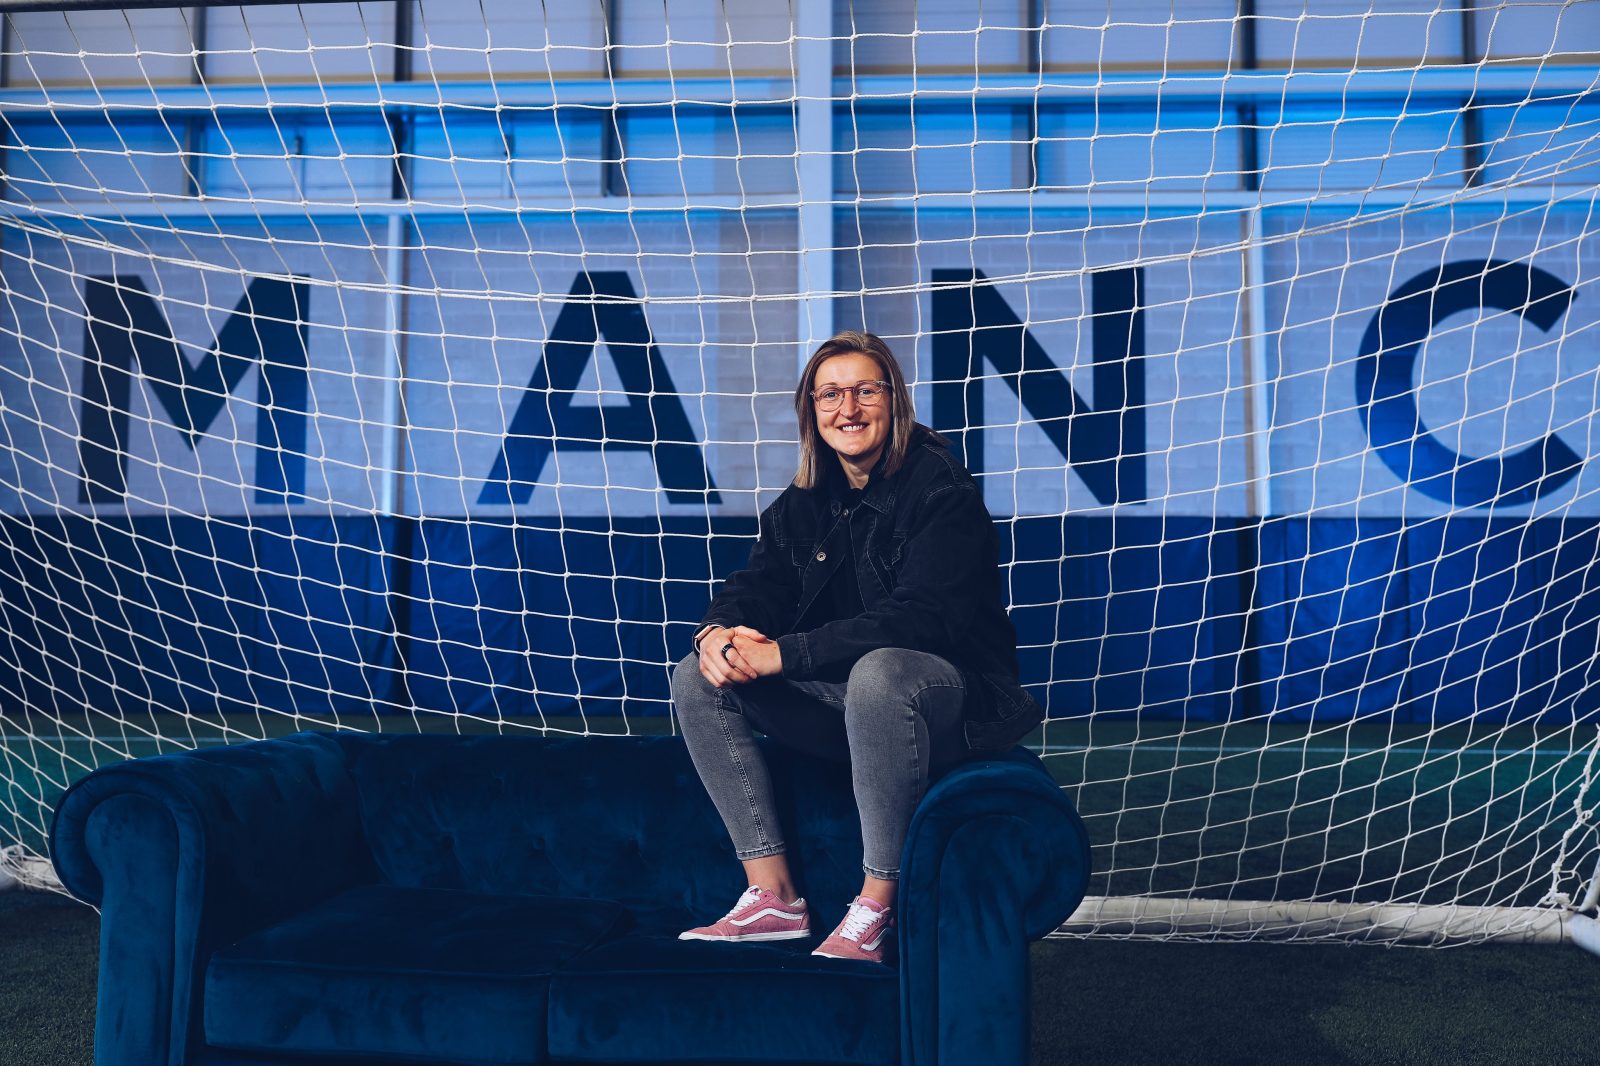 Man City&#8217;s Ellen White on her club career, life outside football, and the upcoming Manchester derby, The Manc